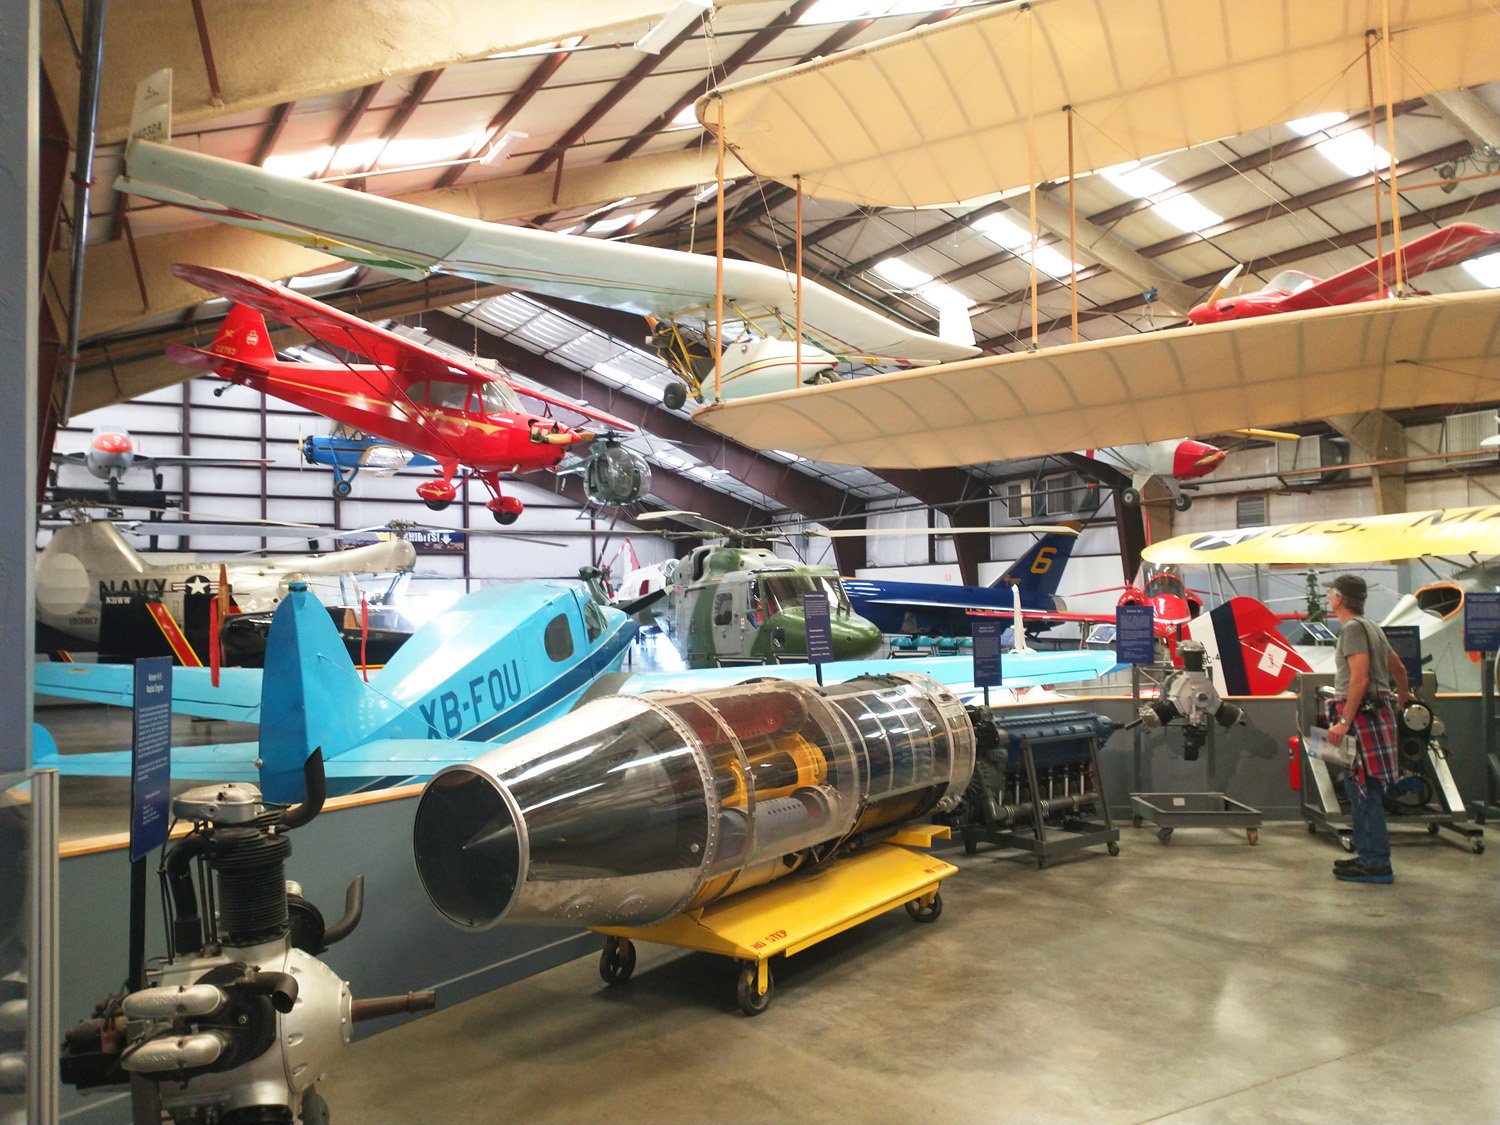 Pima Air and Space Museum. A very popular local attraction.